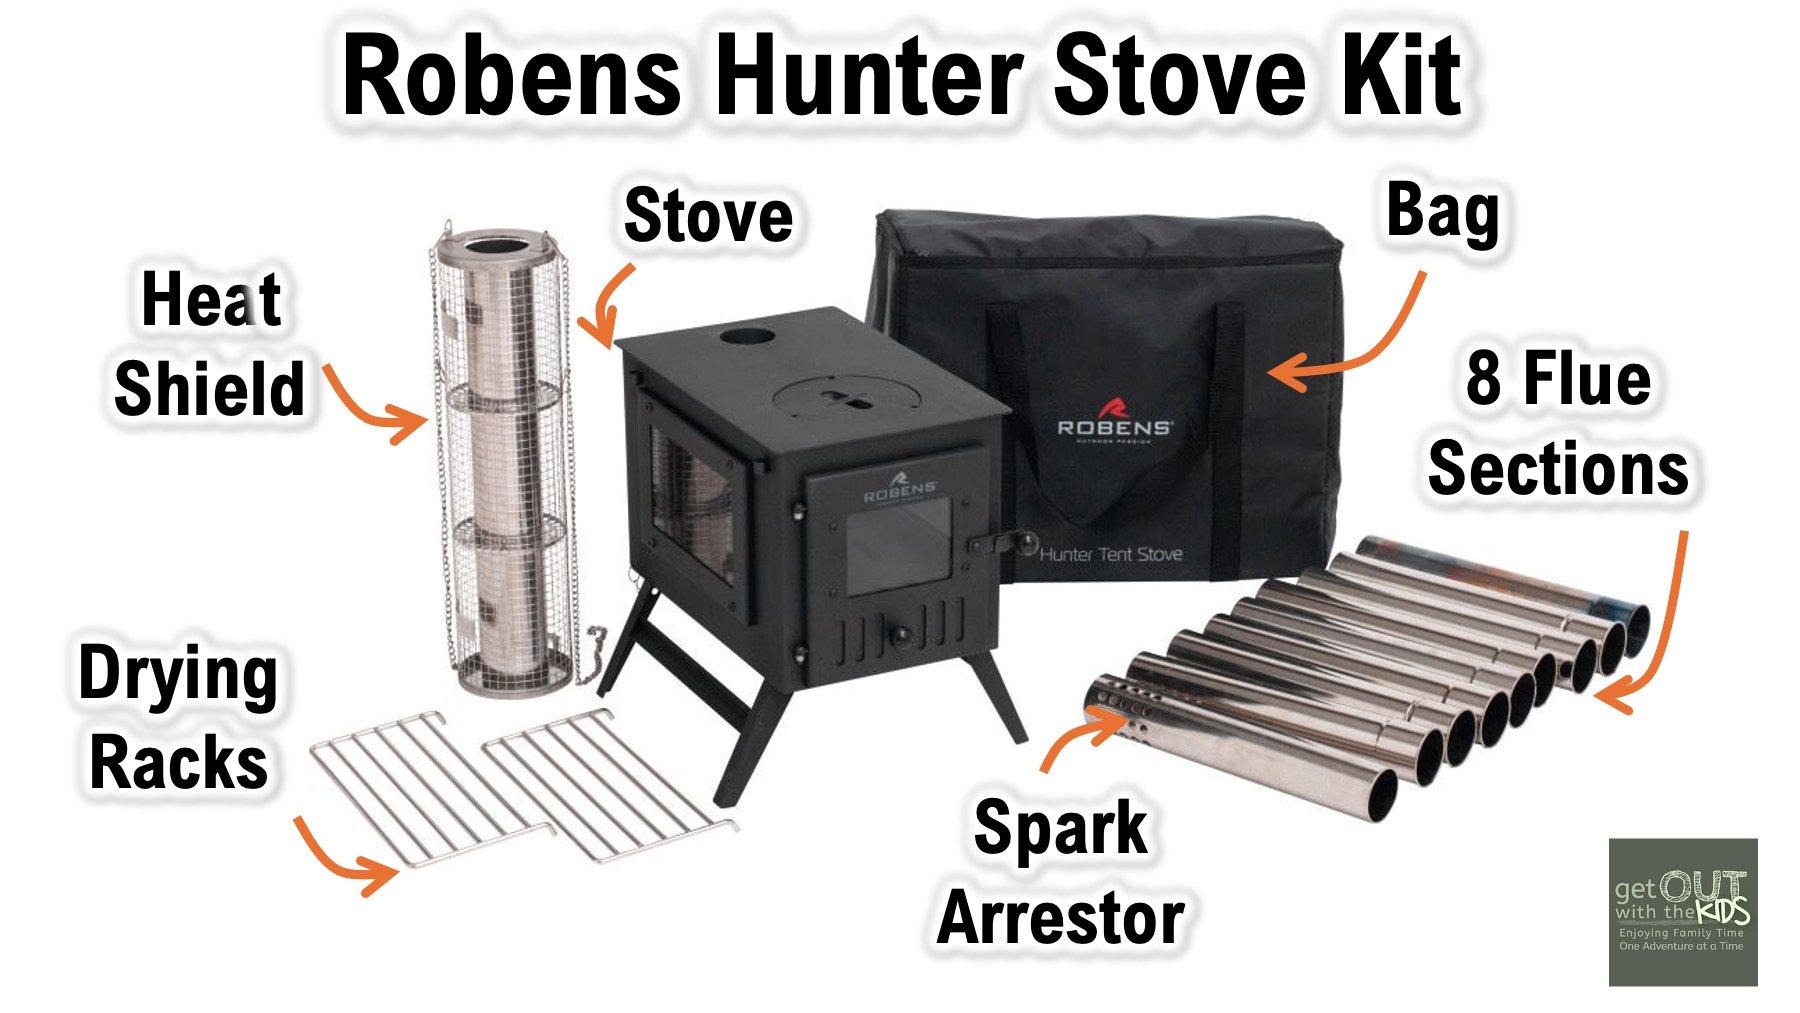 The kit that comes with the Robens Hunter Stove